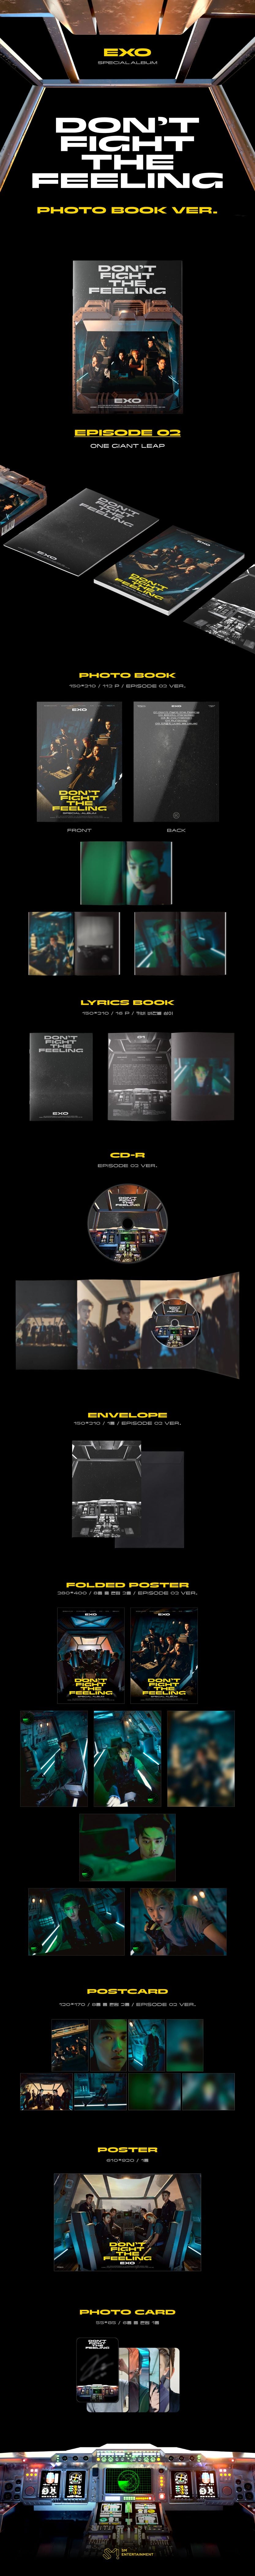 EXO Special Album DON’T FIGHT THE FEELING EPISODE 02 - One Giant Leap